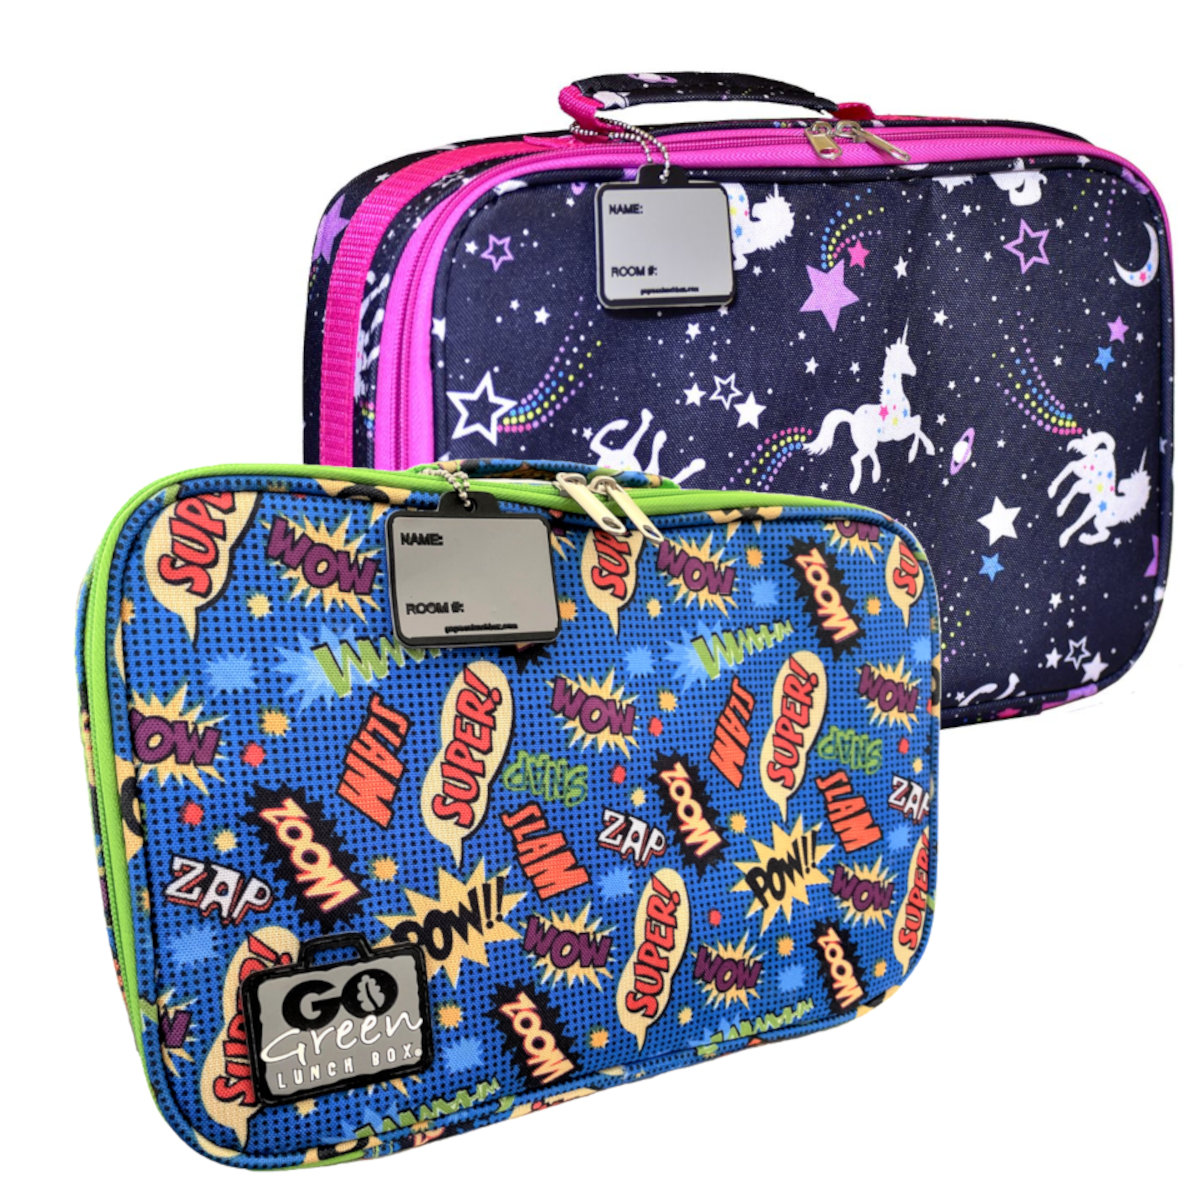 Blue Lunch Box Lunch Boxes for Kids Insulated Lunch Bag 